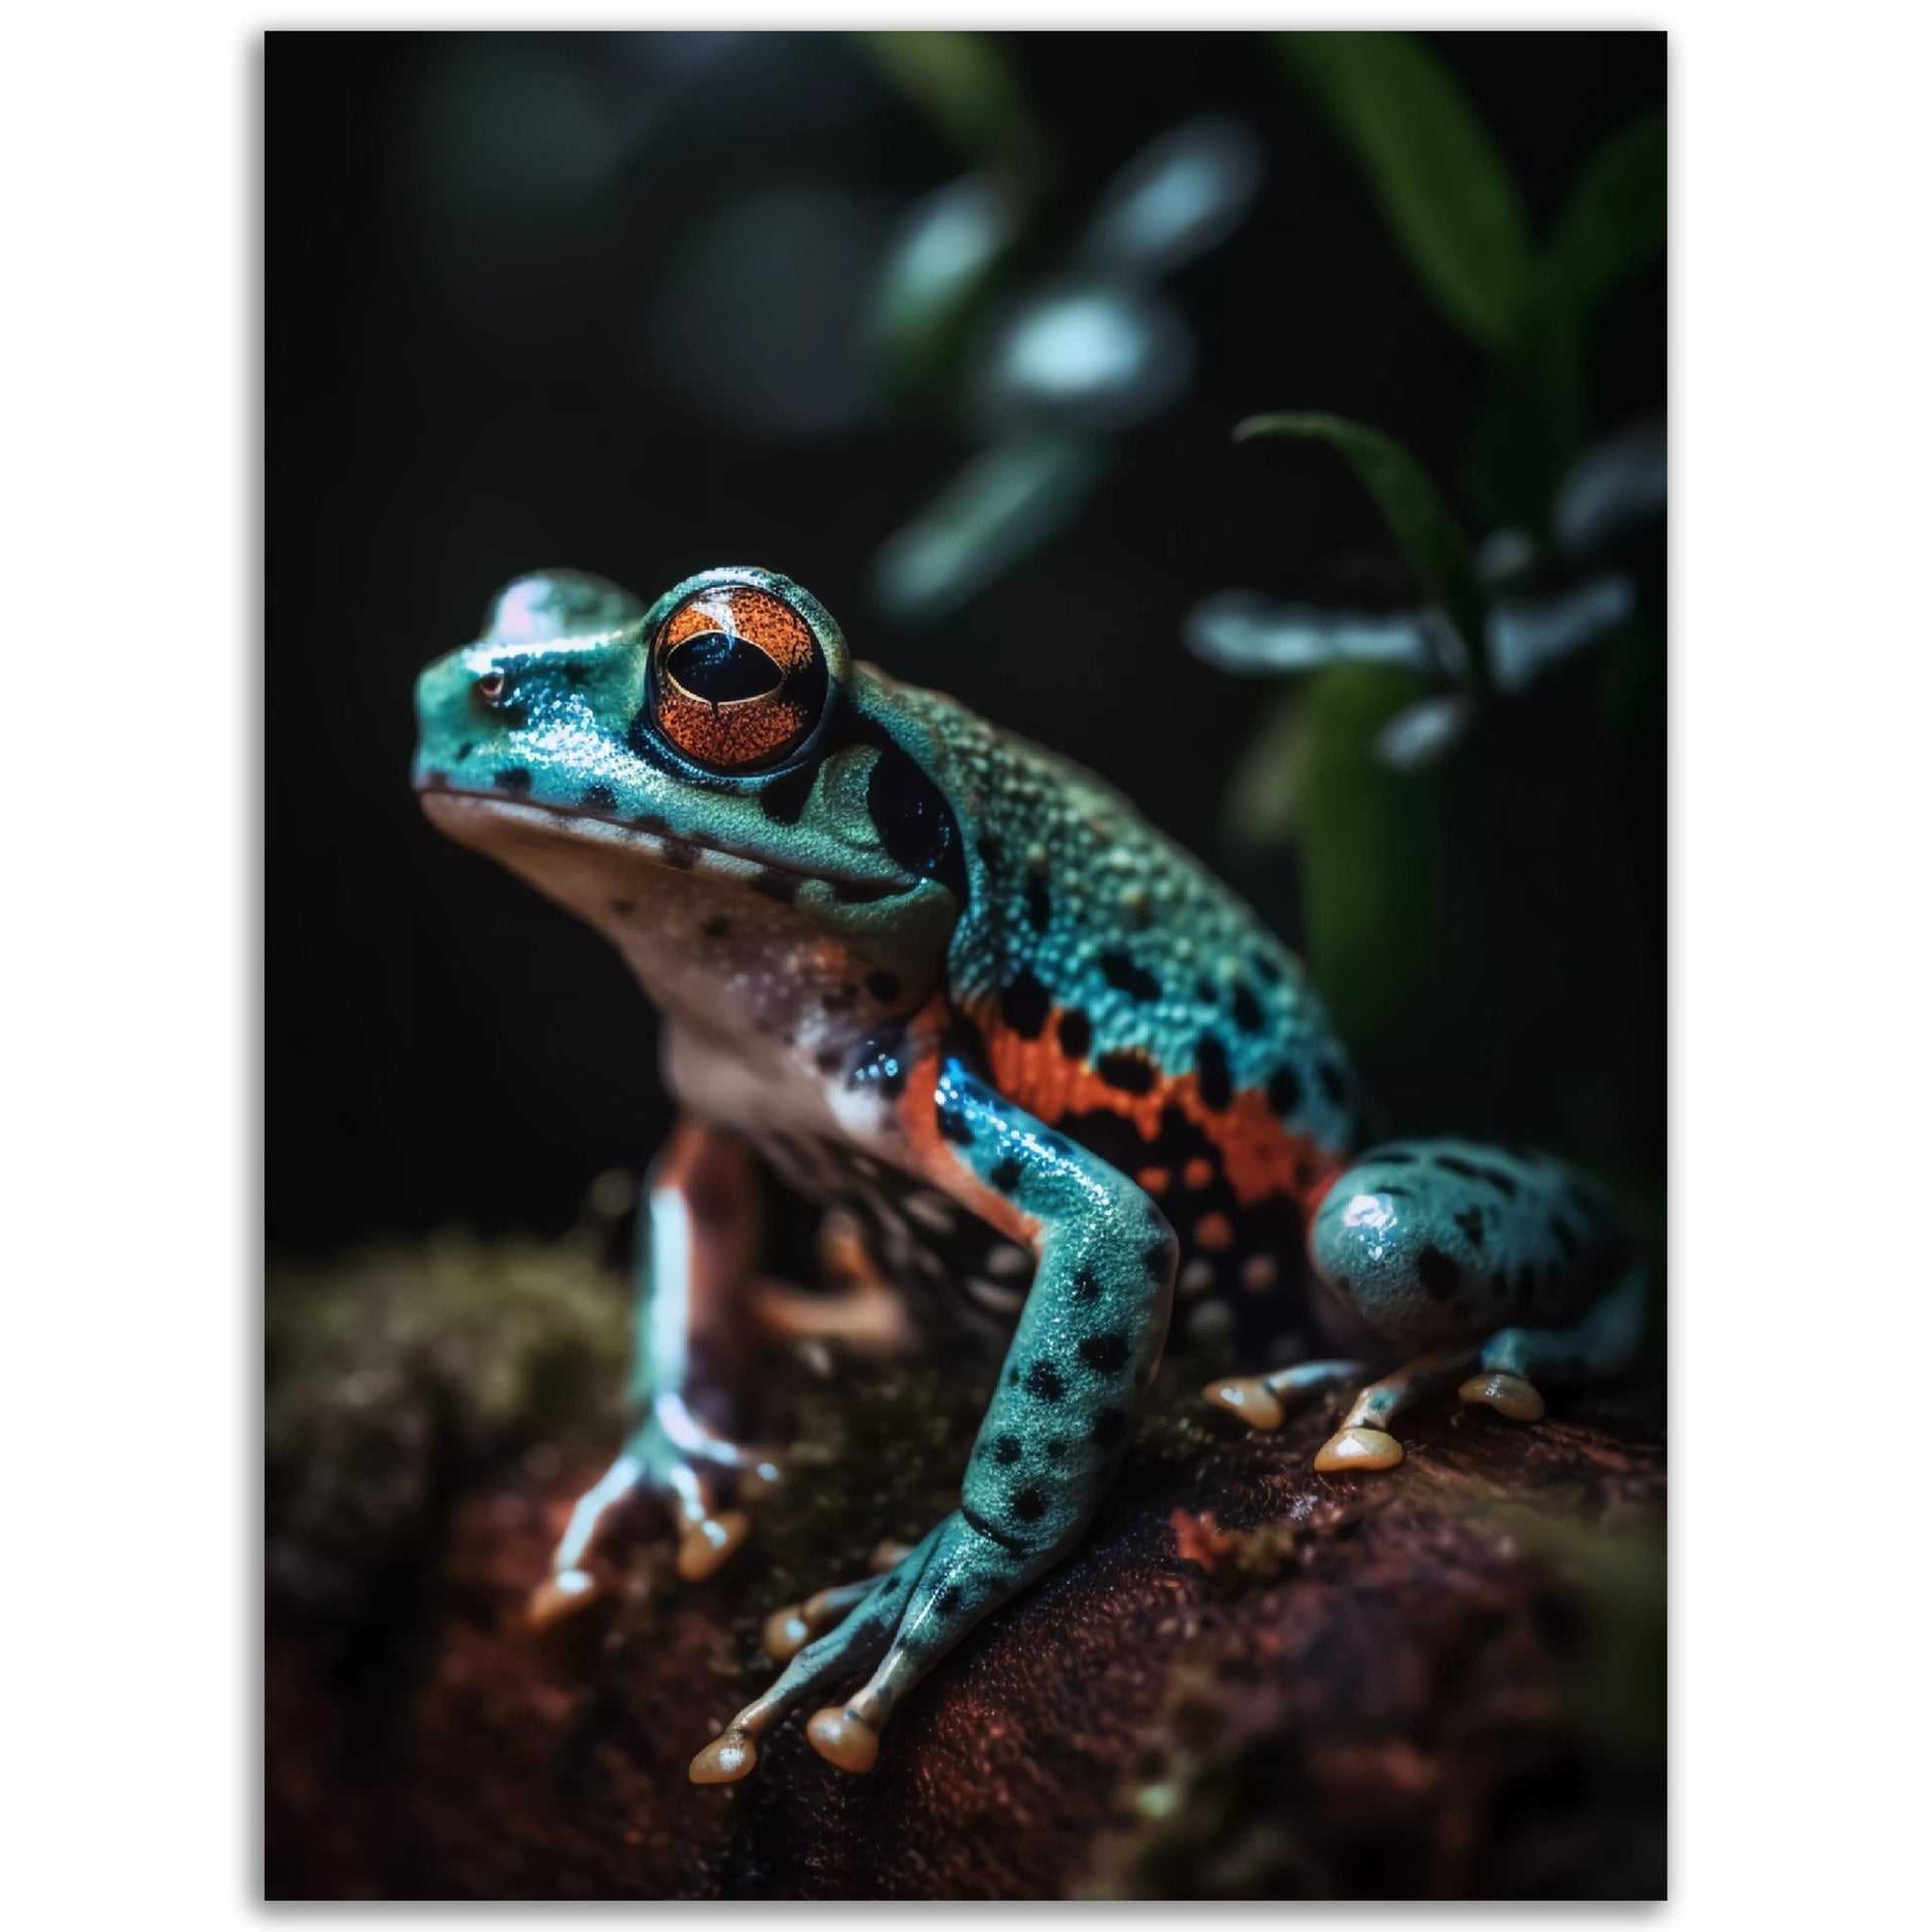 A Blue Polka dot Forest Friend sitting on a branch, perfect for poster or wall art.